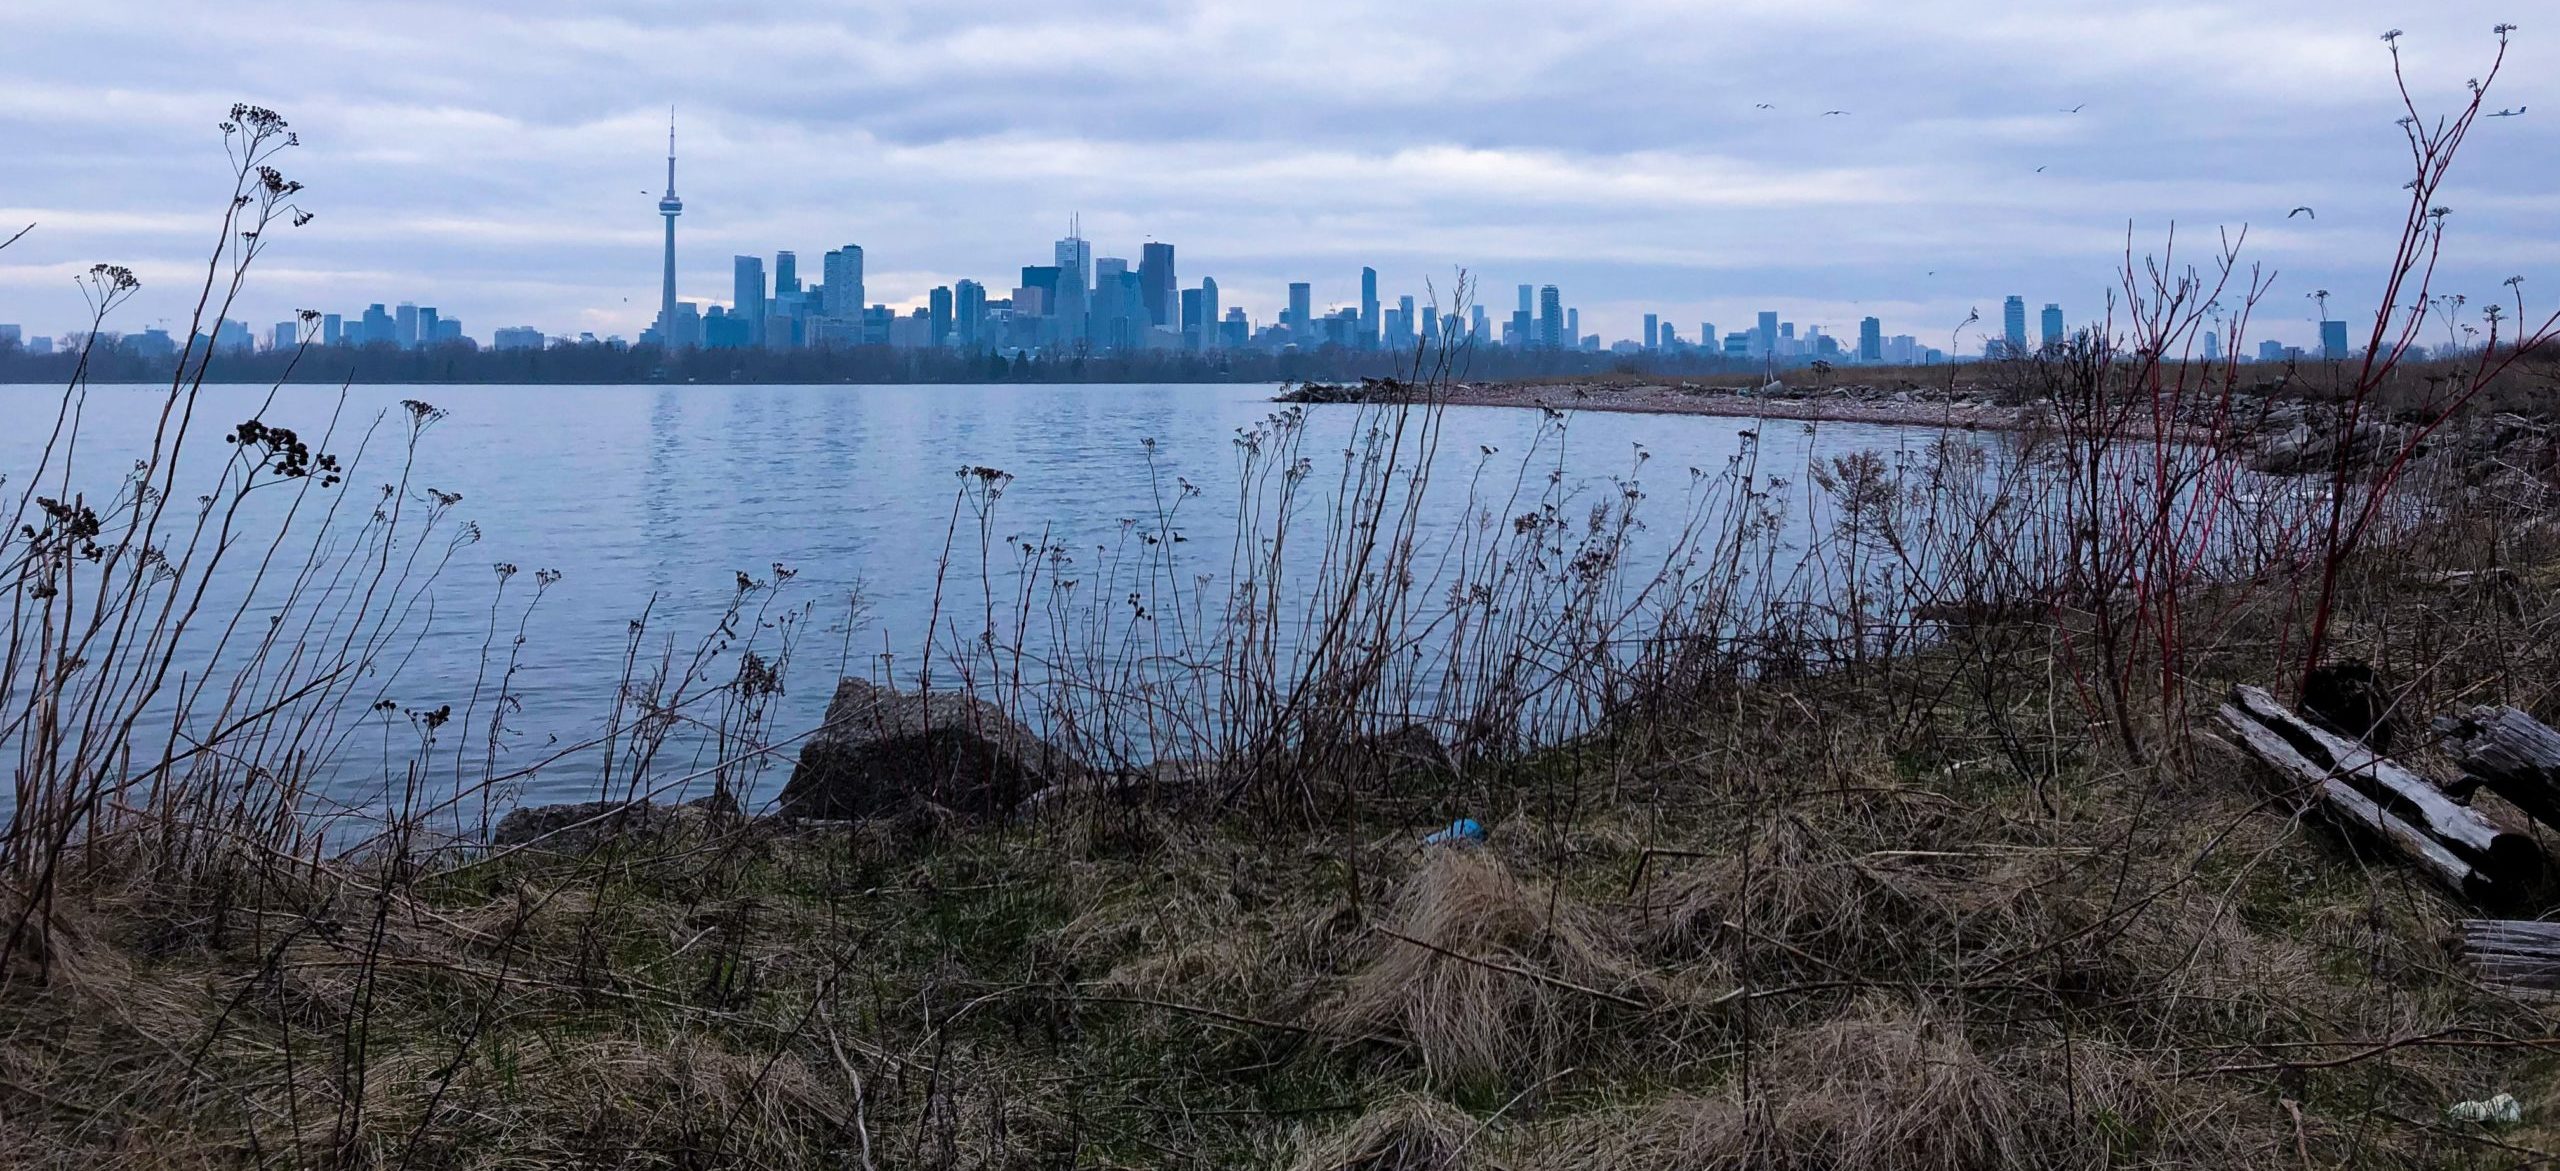 View of Toronto landscape from Lake